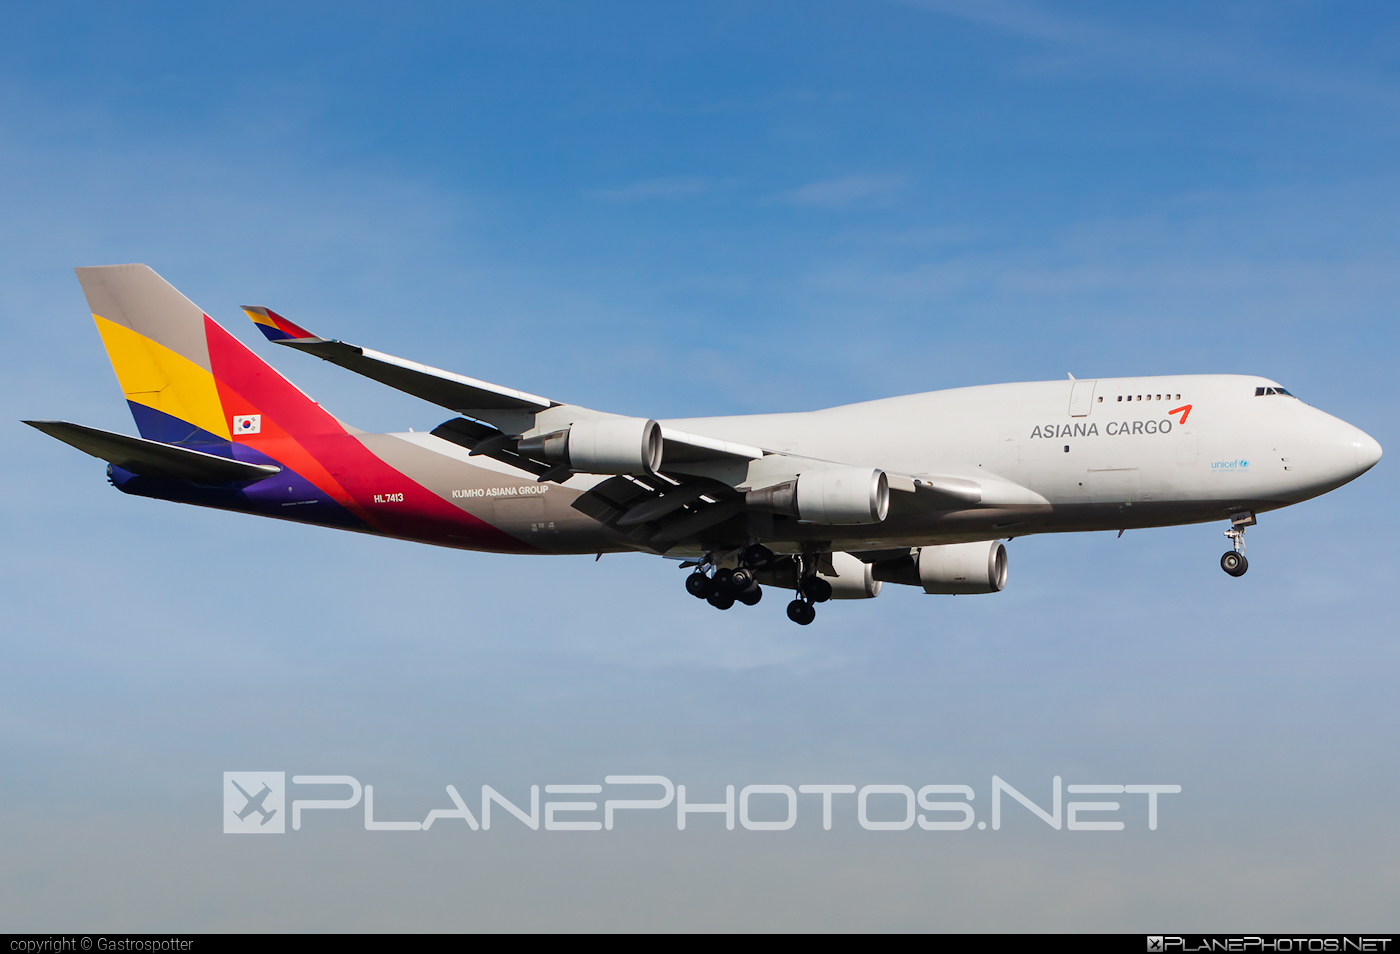 Boeing 747-400BDSF - HL7413 operated by Asiana Cargo #asianacargo #b747 #b747bdsf #b747freighter #bedekspecialfreighter #boeing #boeing747 #jumbo